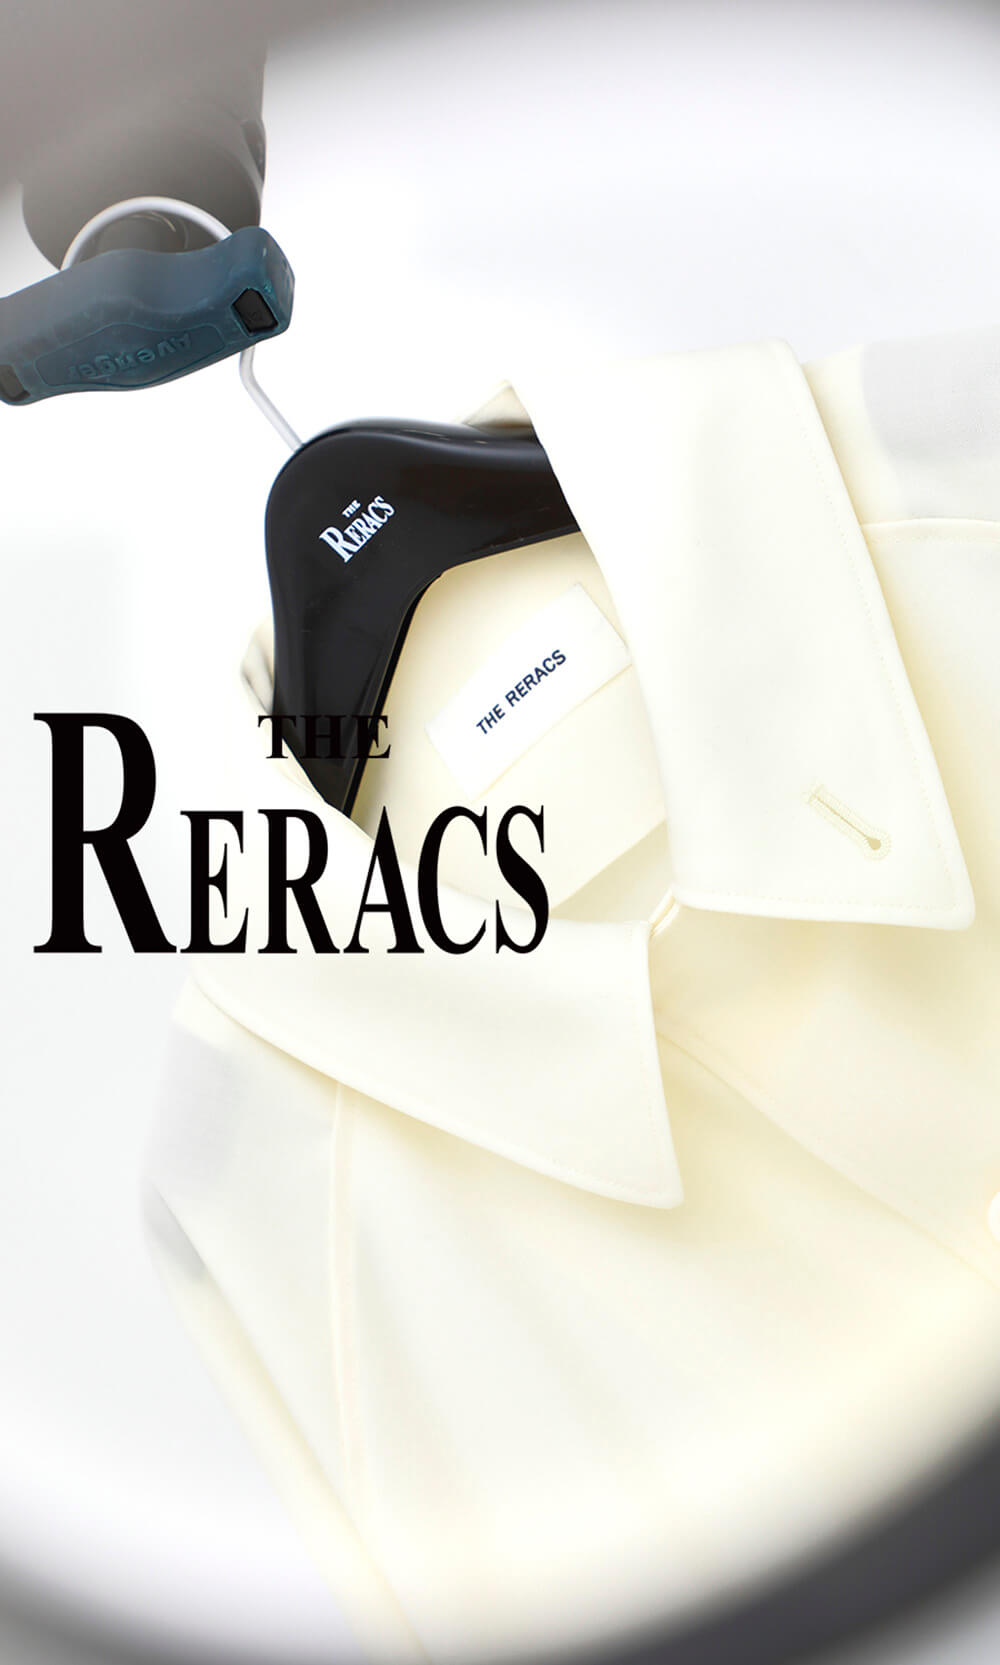 THE RERACS | STUDIOUS｜ STUDIOUS ONLINE公式通販サイト